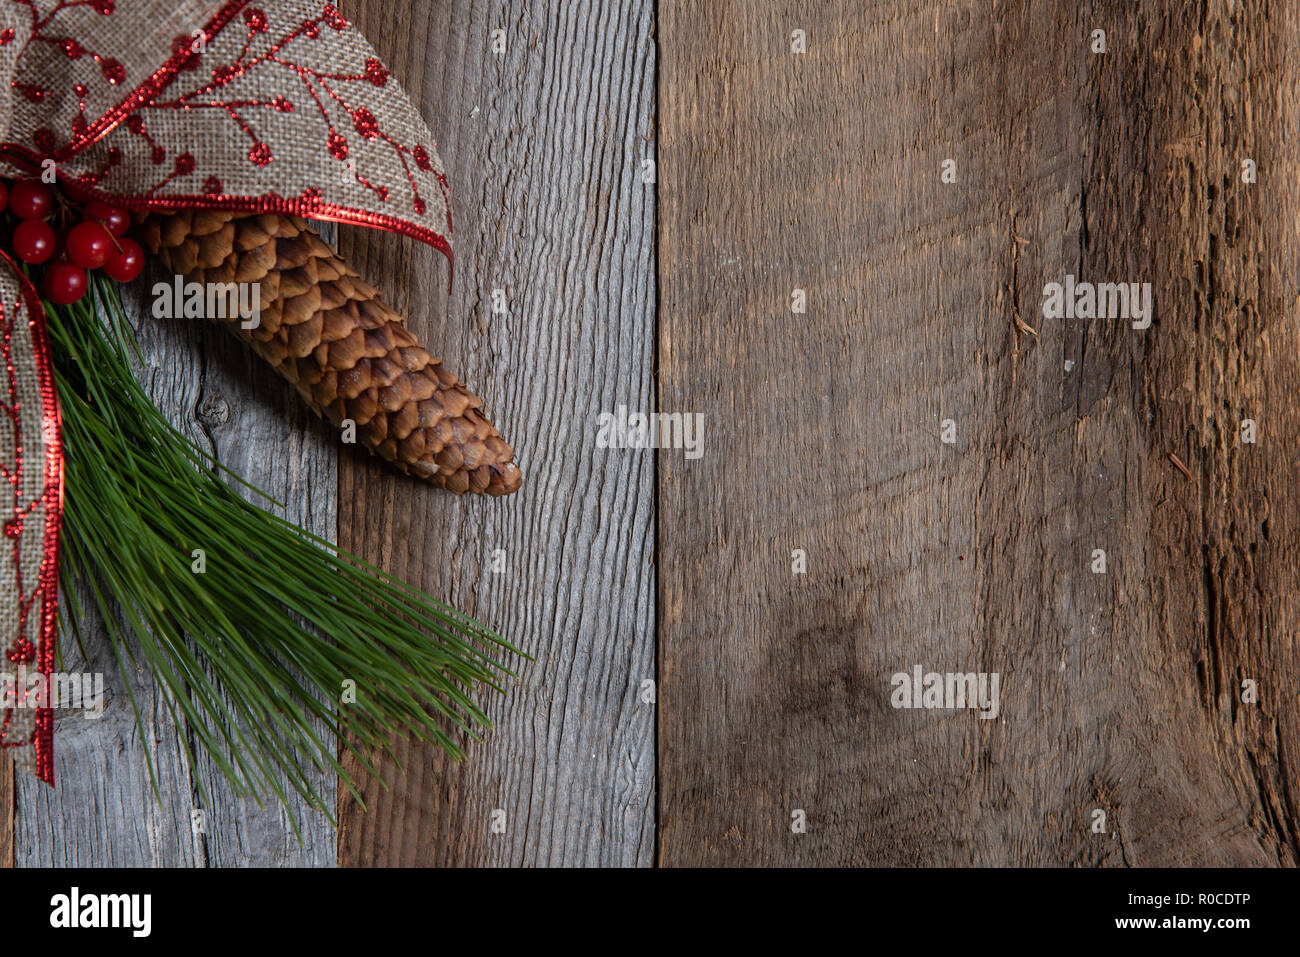 Authentic and rustic Christmas holiday decorations on weathered wood ...